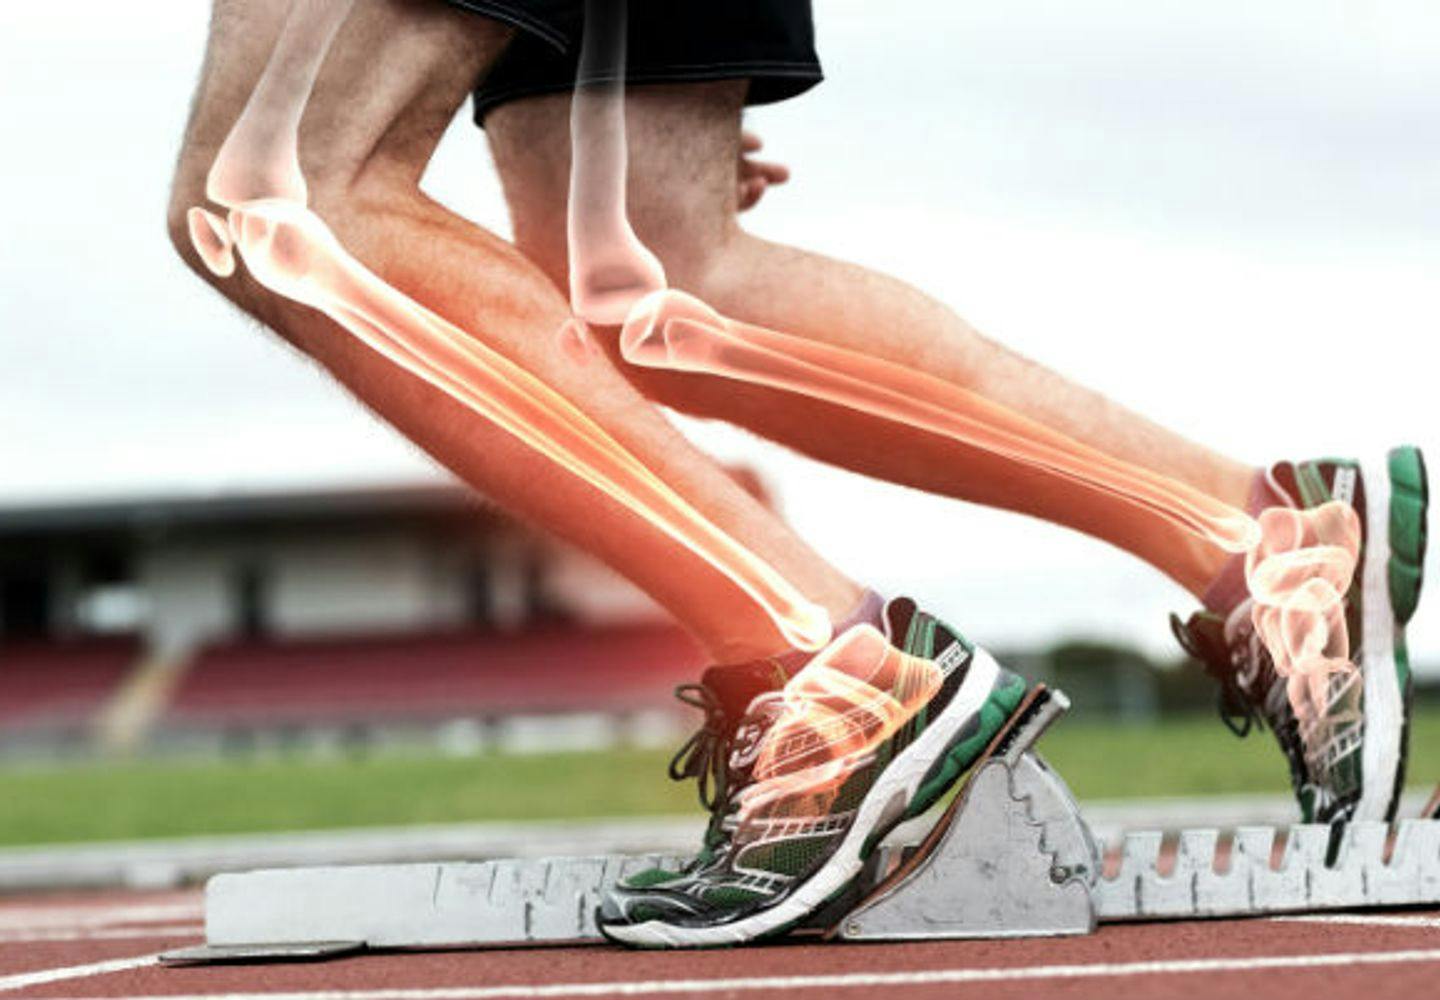 When do you need surgery after a knee injury?